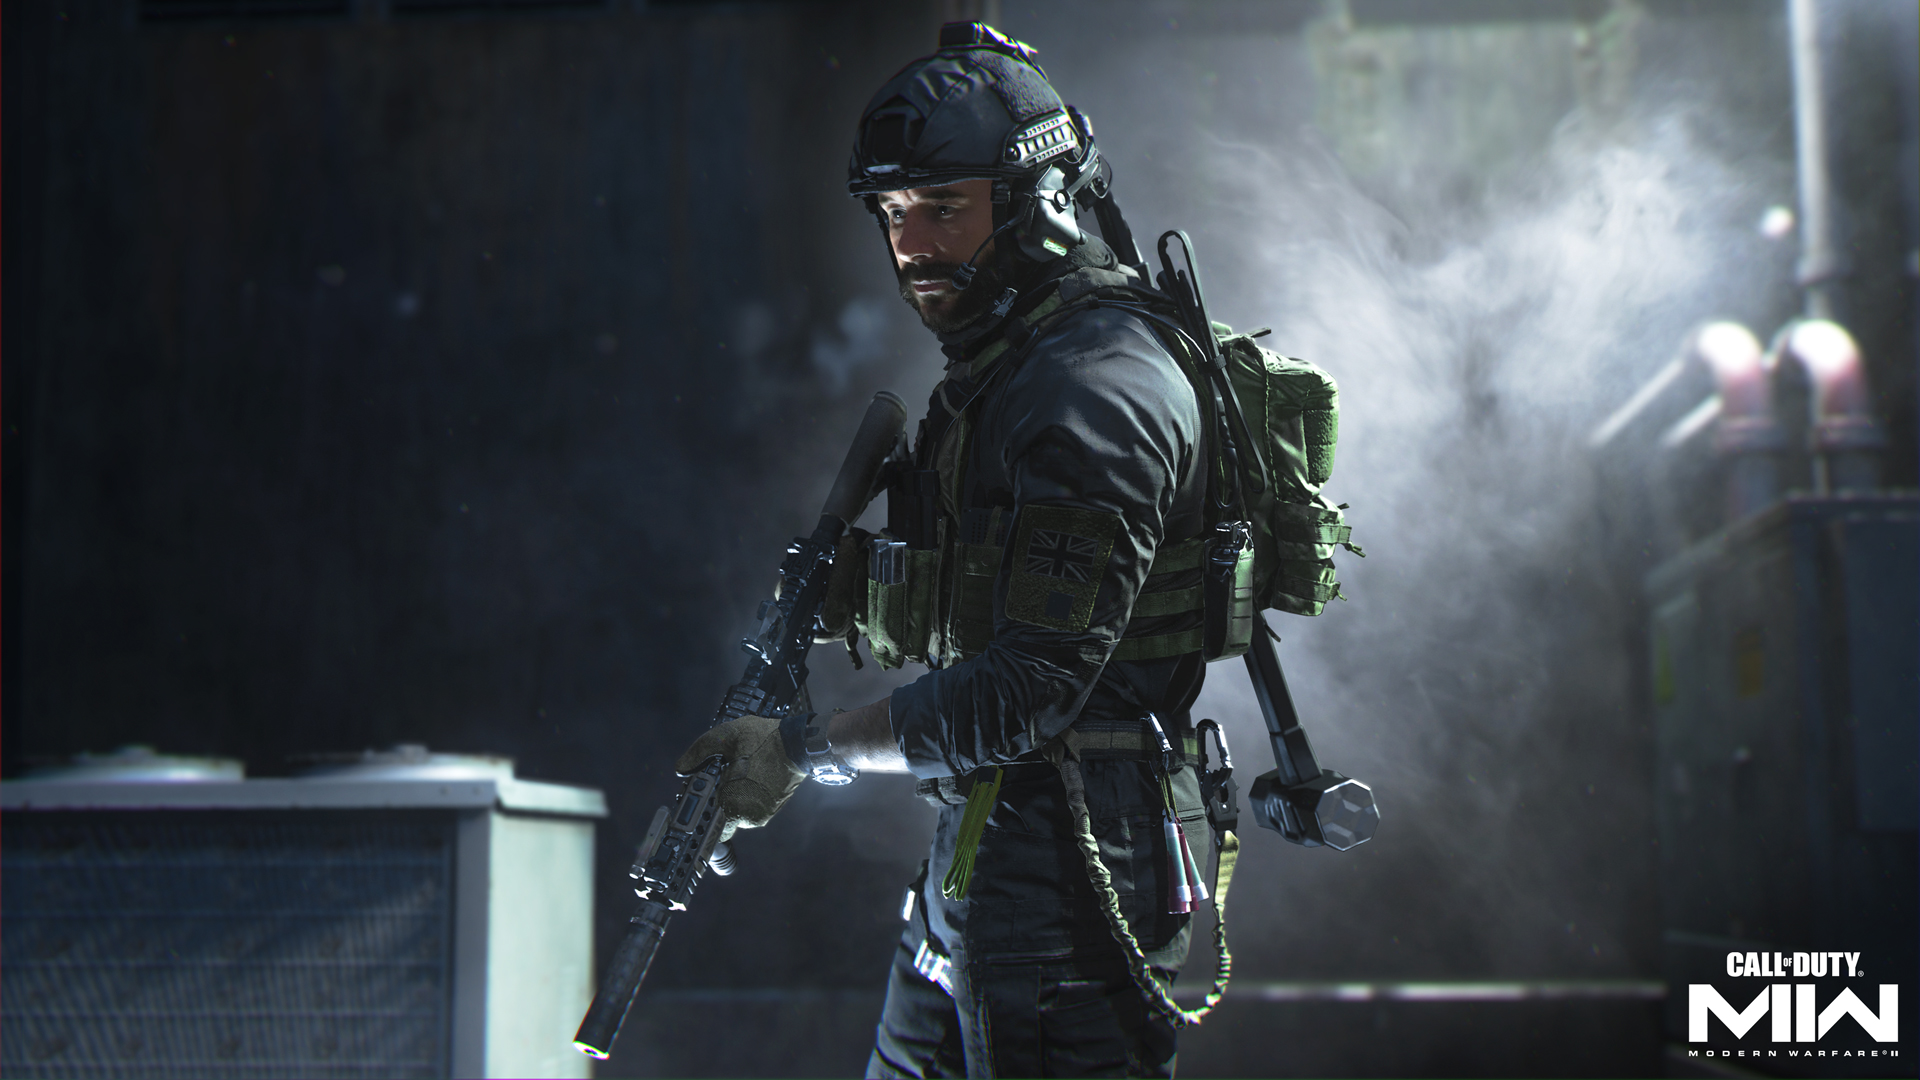 Call of Duty's anti-cheat software inadvertently bans innocent players.